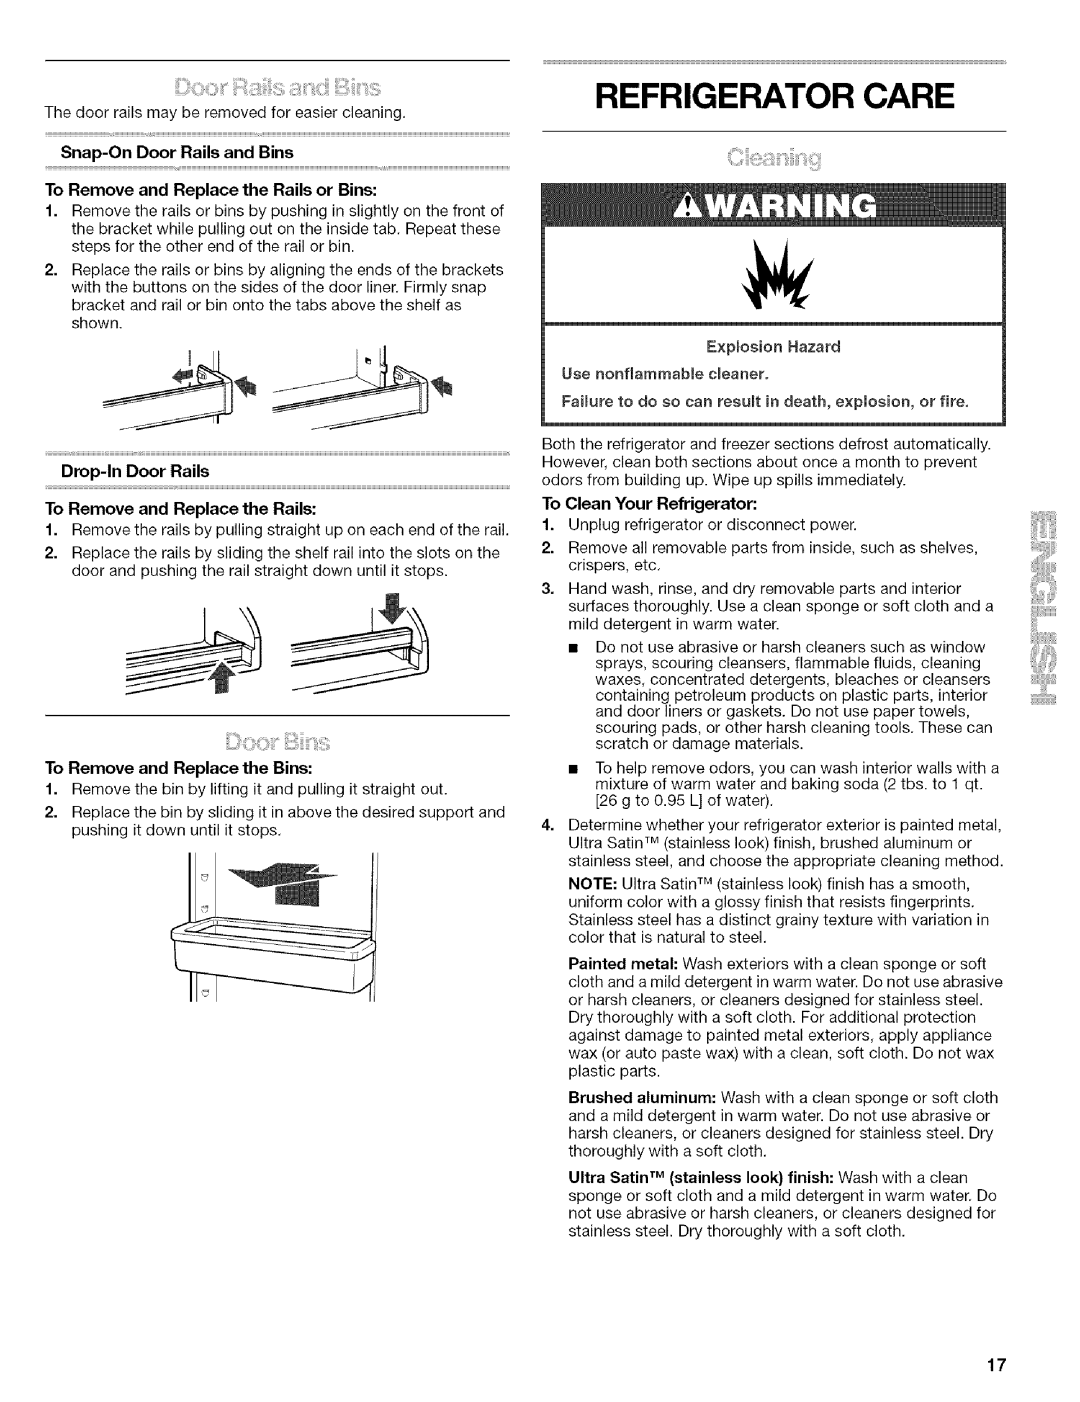 Kenmore 2305761A manual Refrigerator Care, Snap-OnDoor Rails and Bins, To Remove and Replace the Rails or Bins 